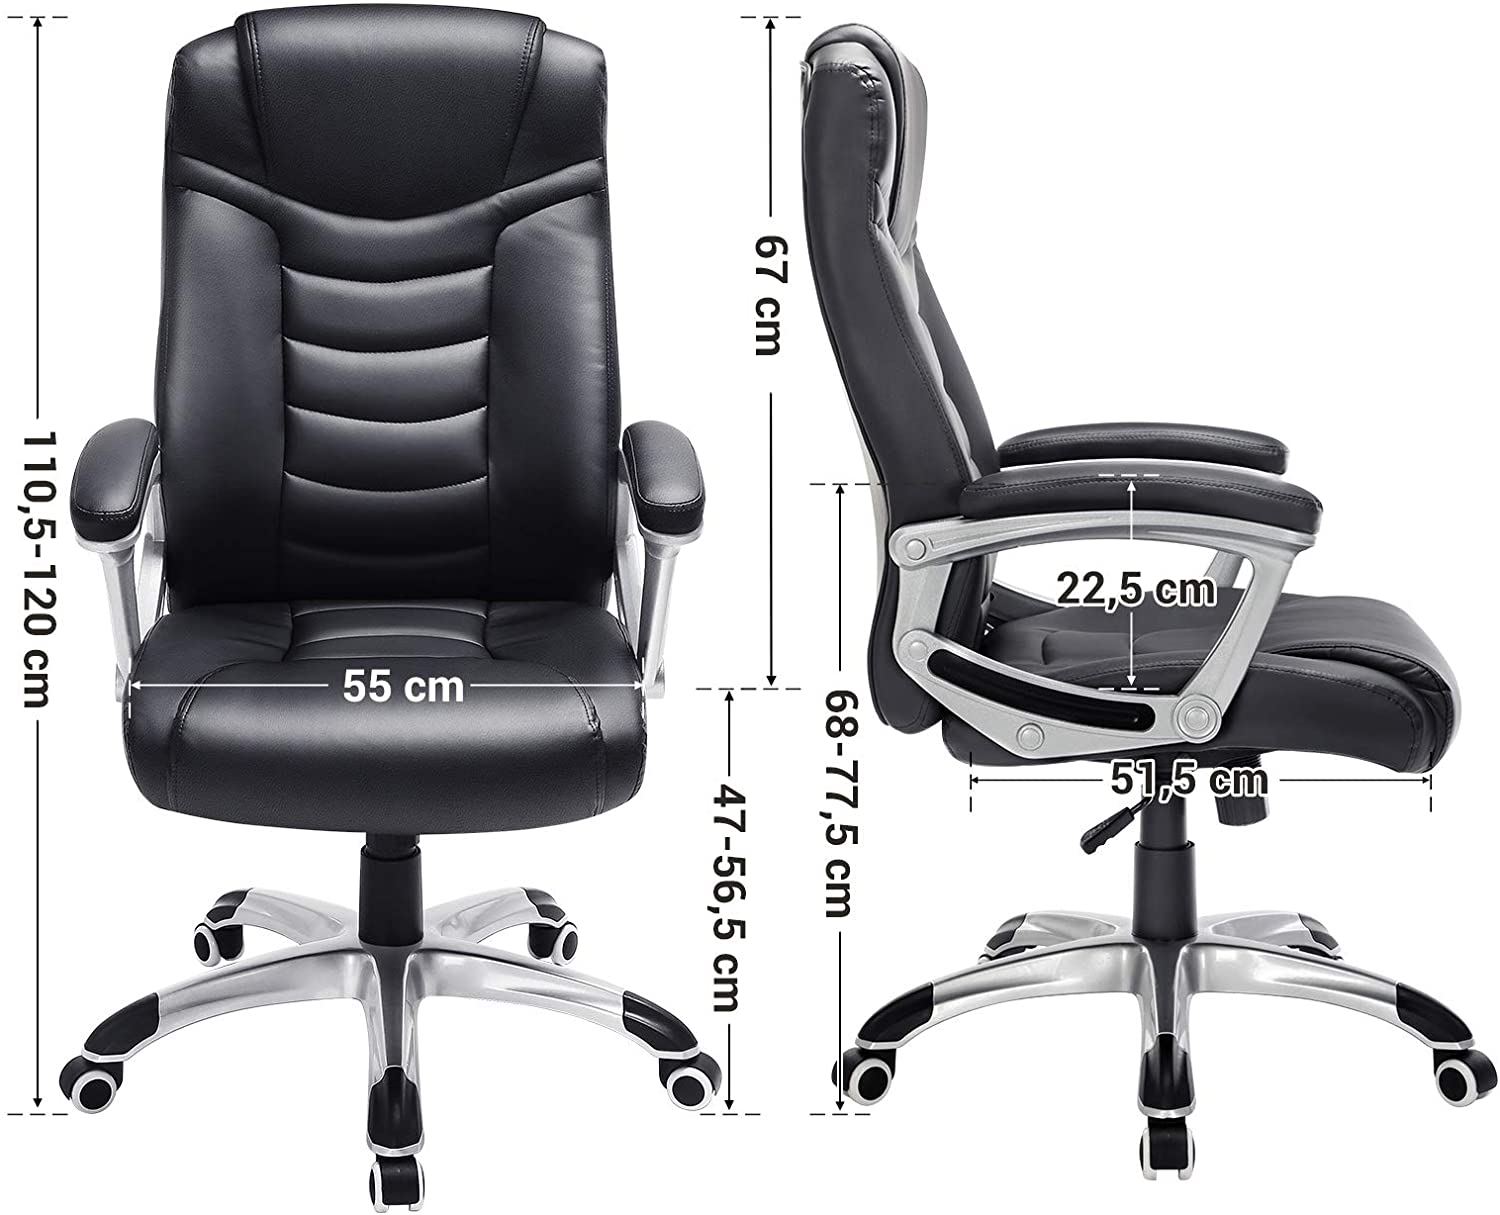 Executive Office Chair, Durable and Stable, Height Adjustable, Ergonomic, Black, OBG21B RAW58.dk 